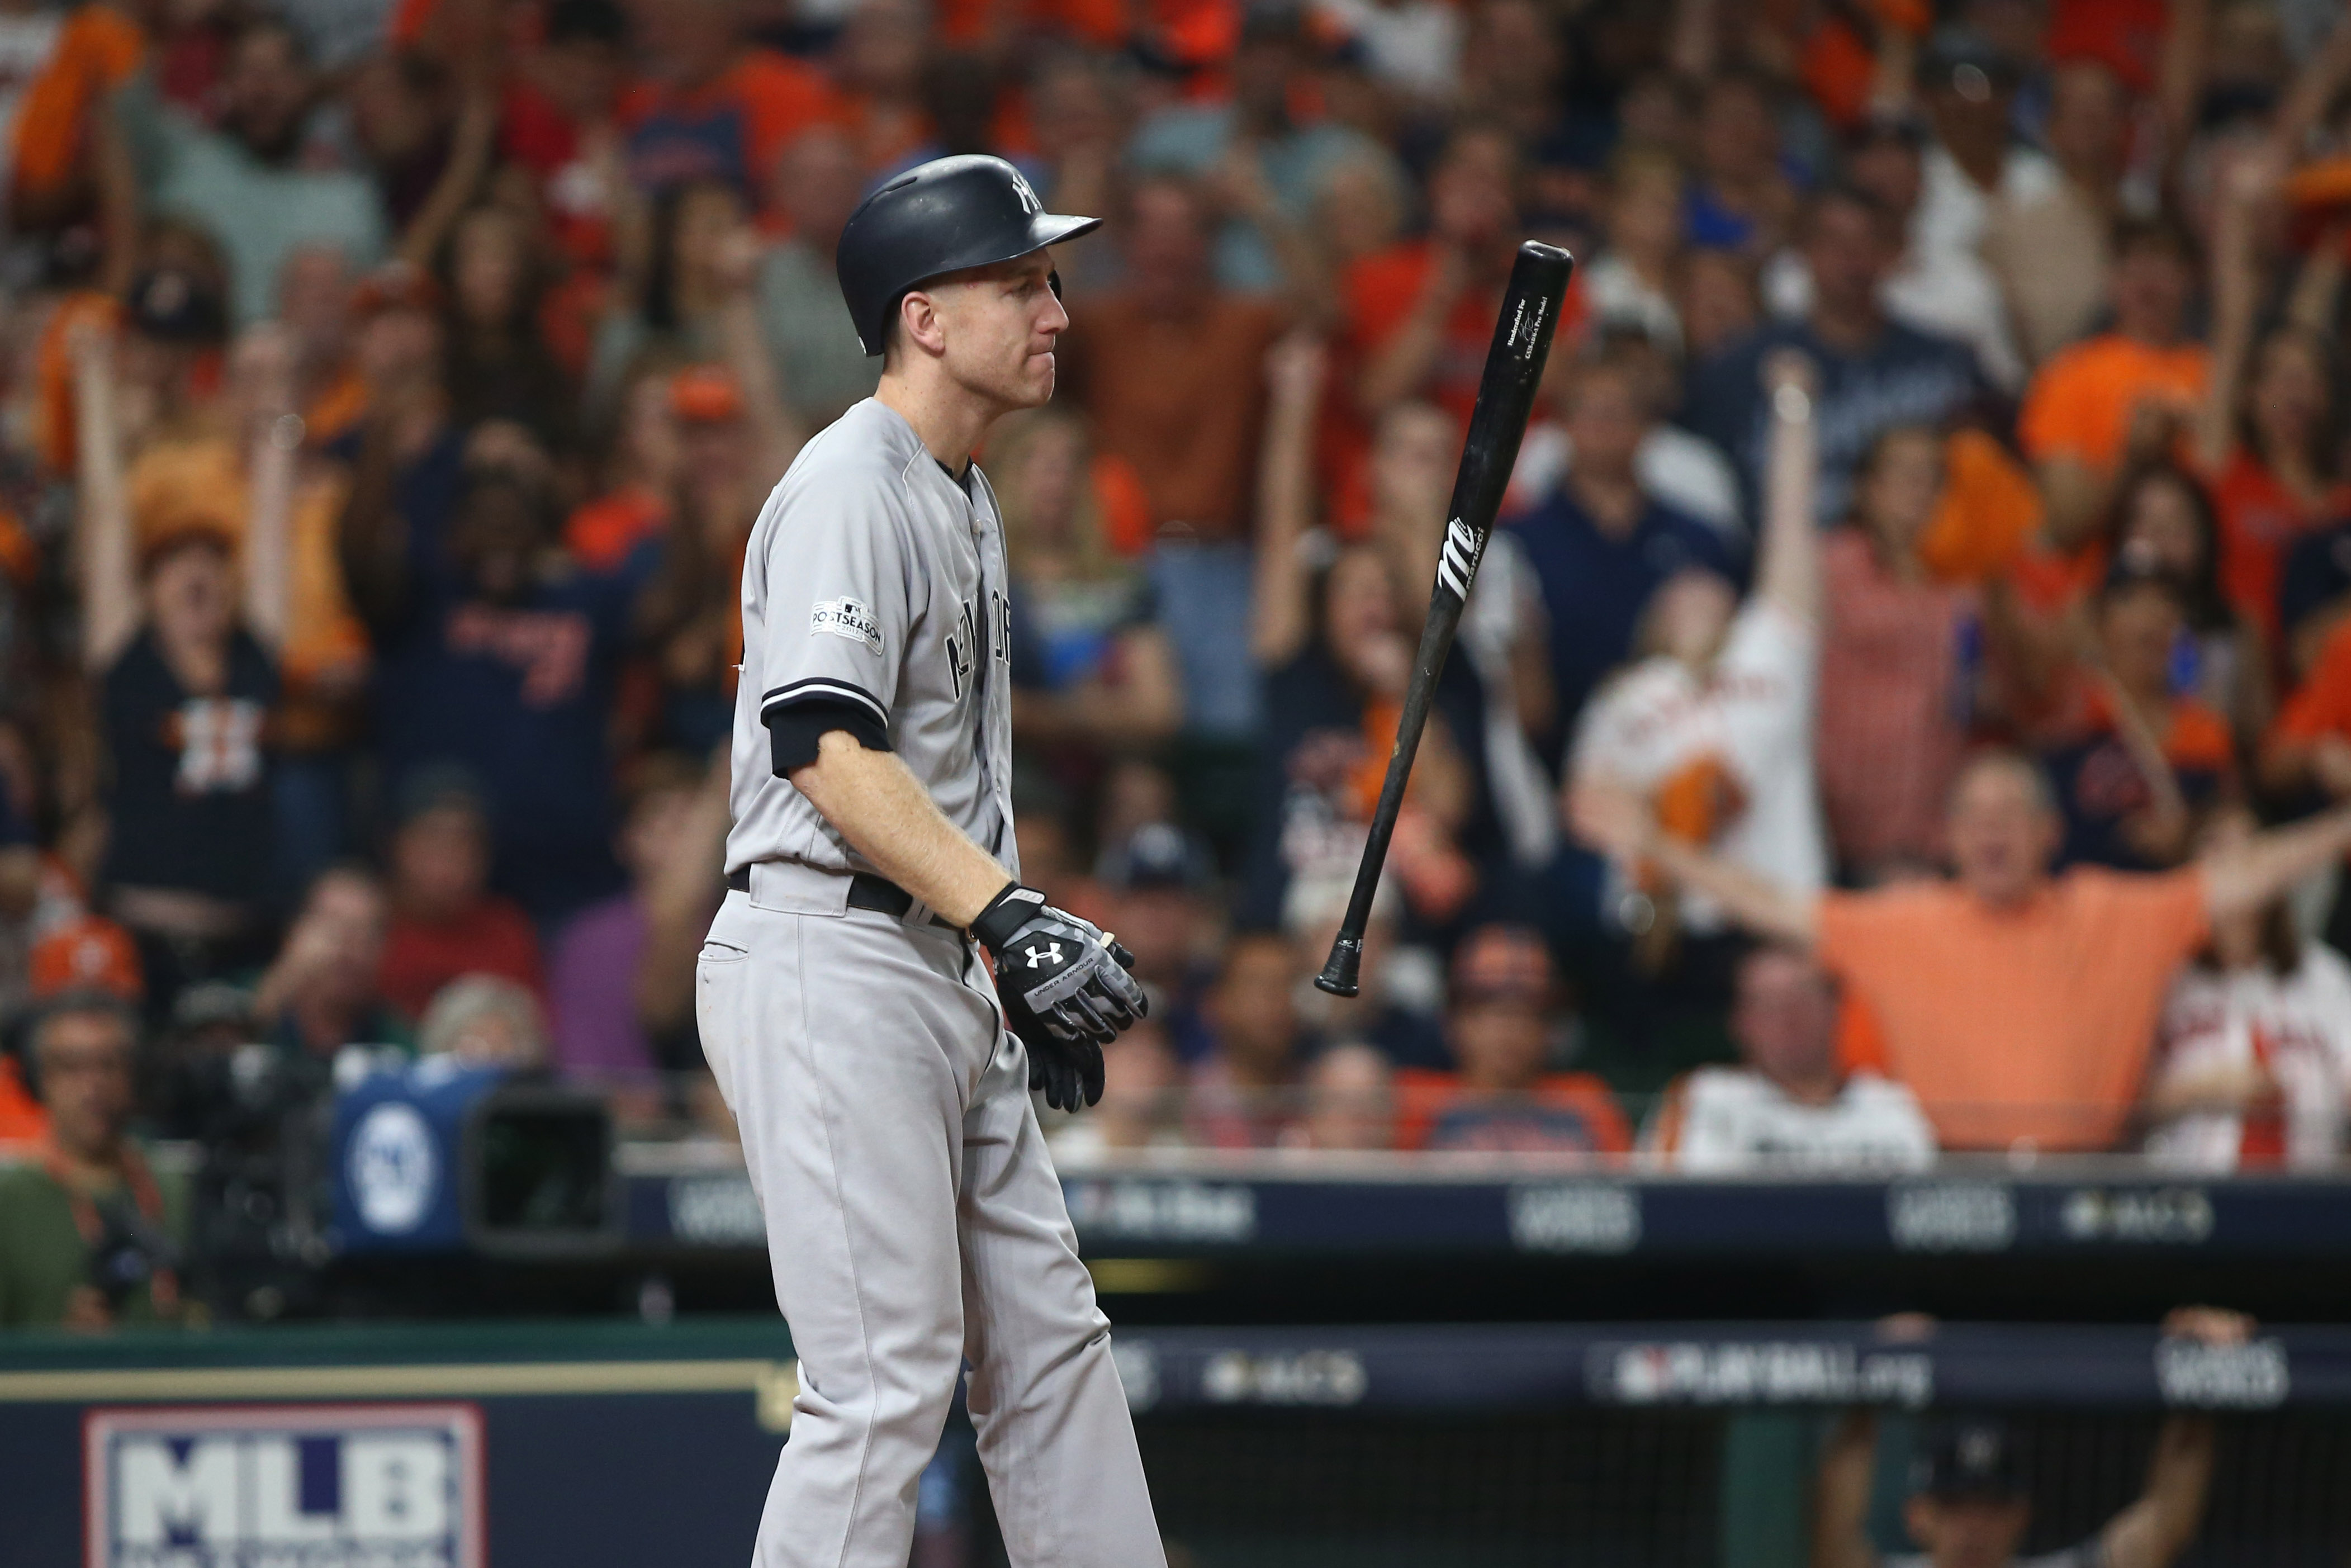 Todd Frazier had the funniest swing of the year